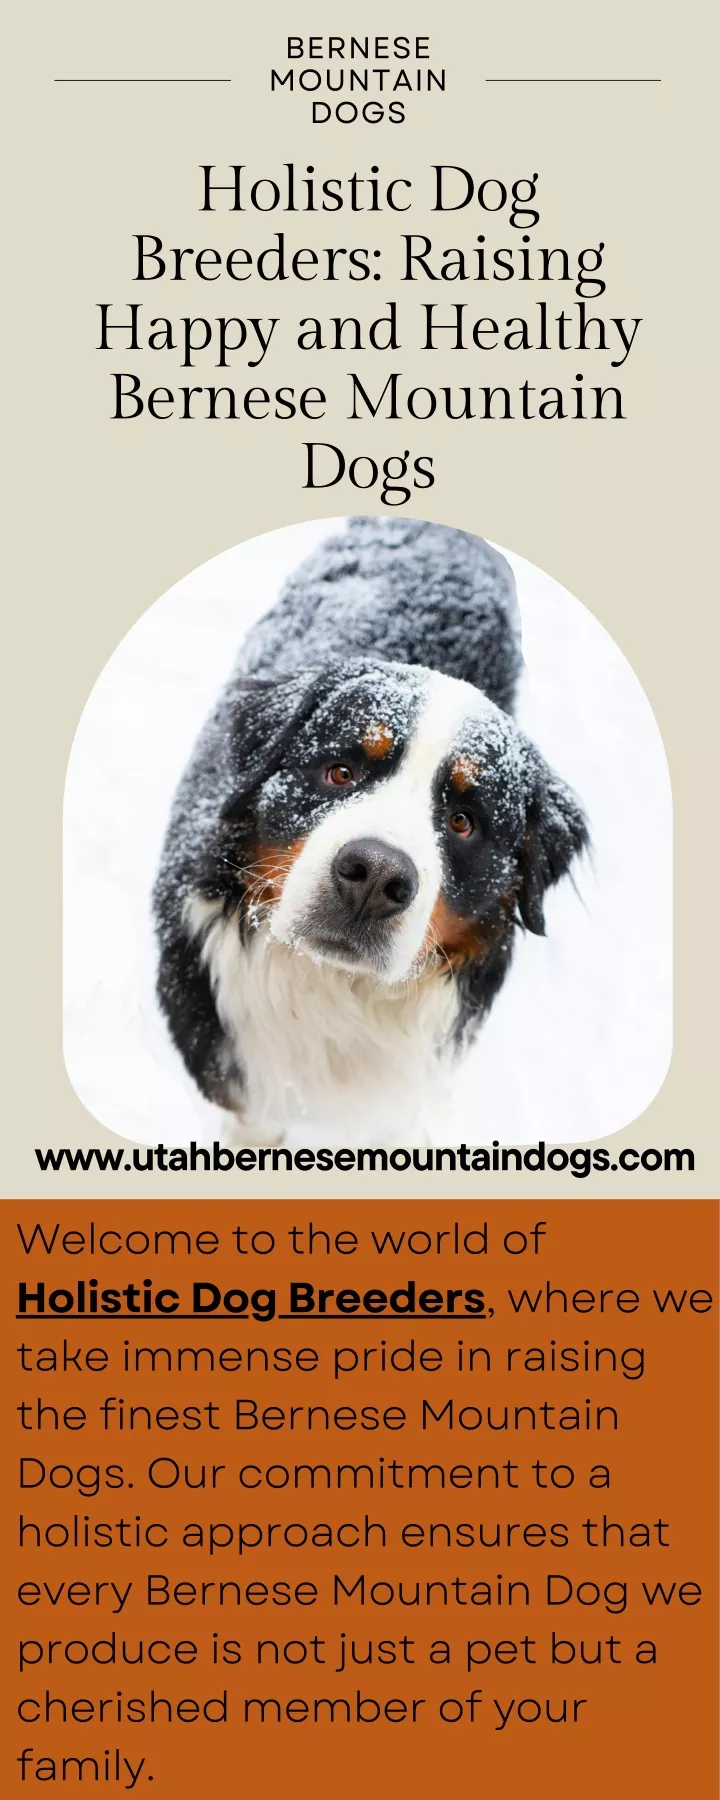 bernese mountain dogs holistic dog breeders